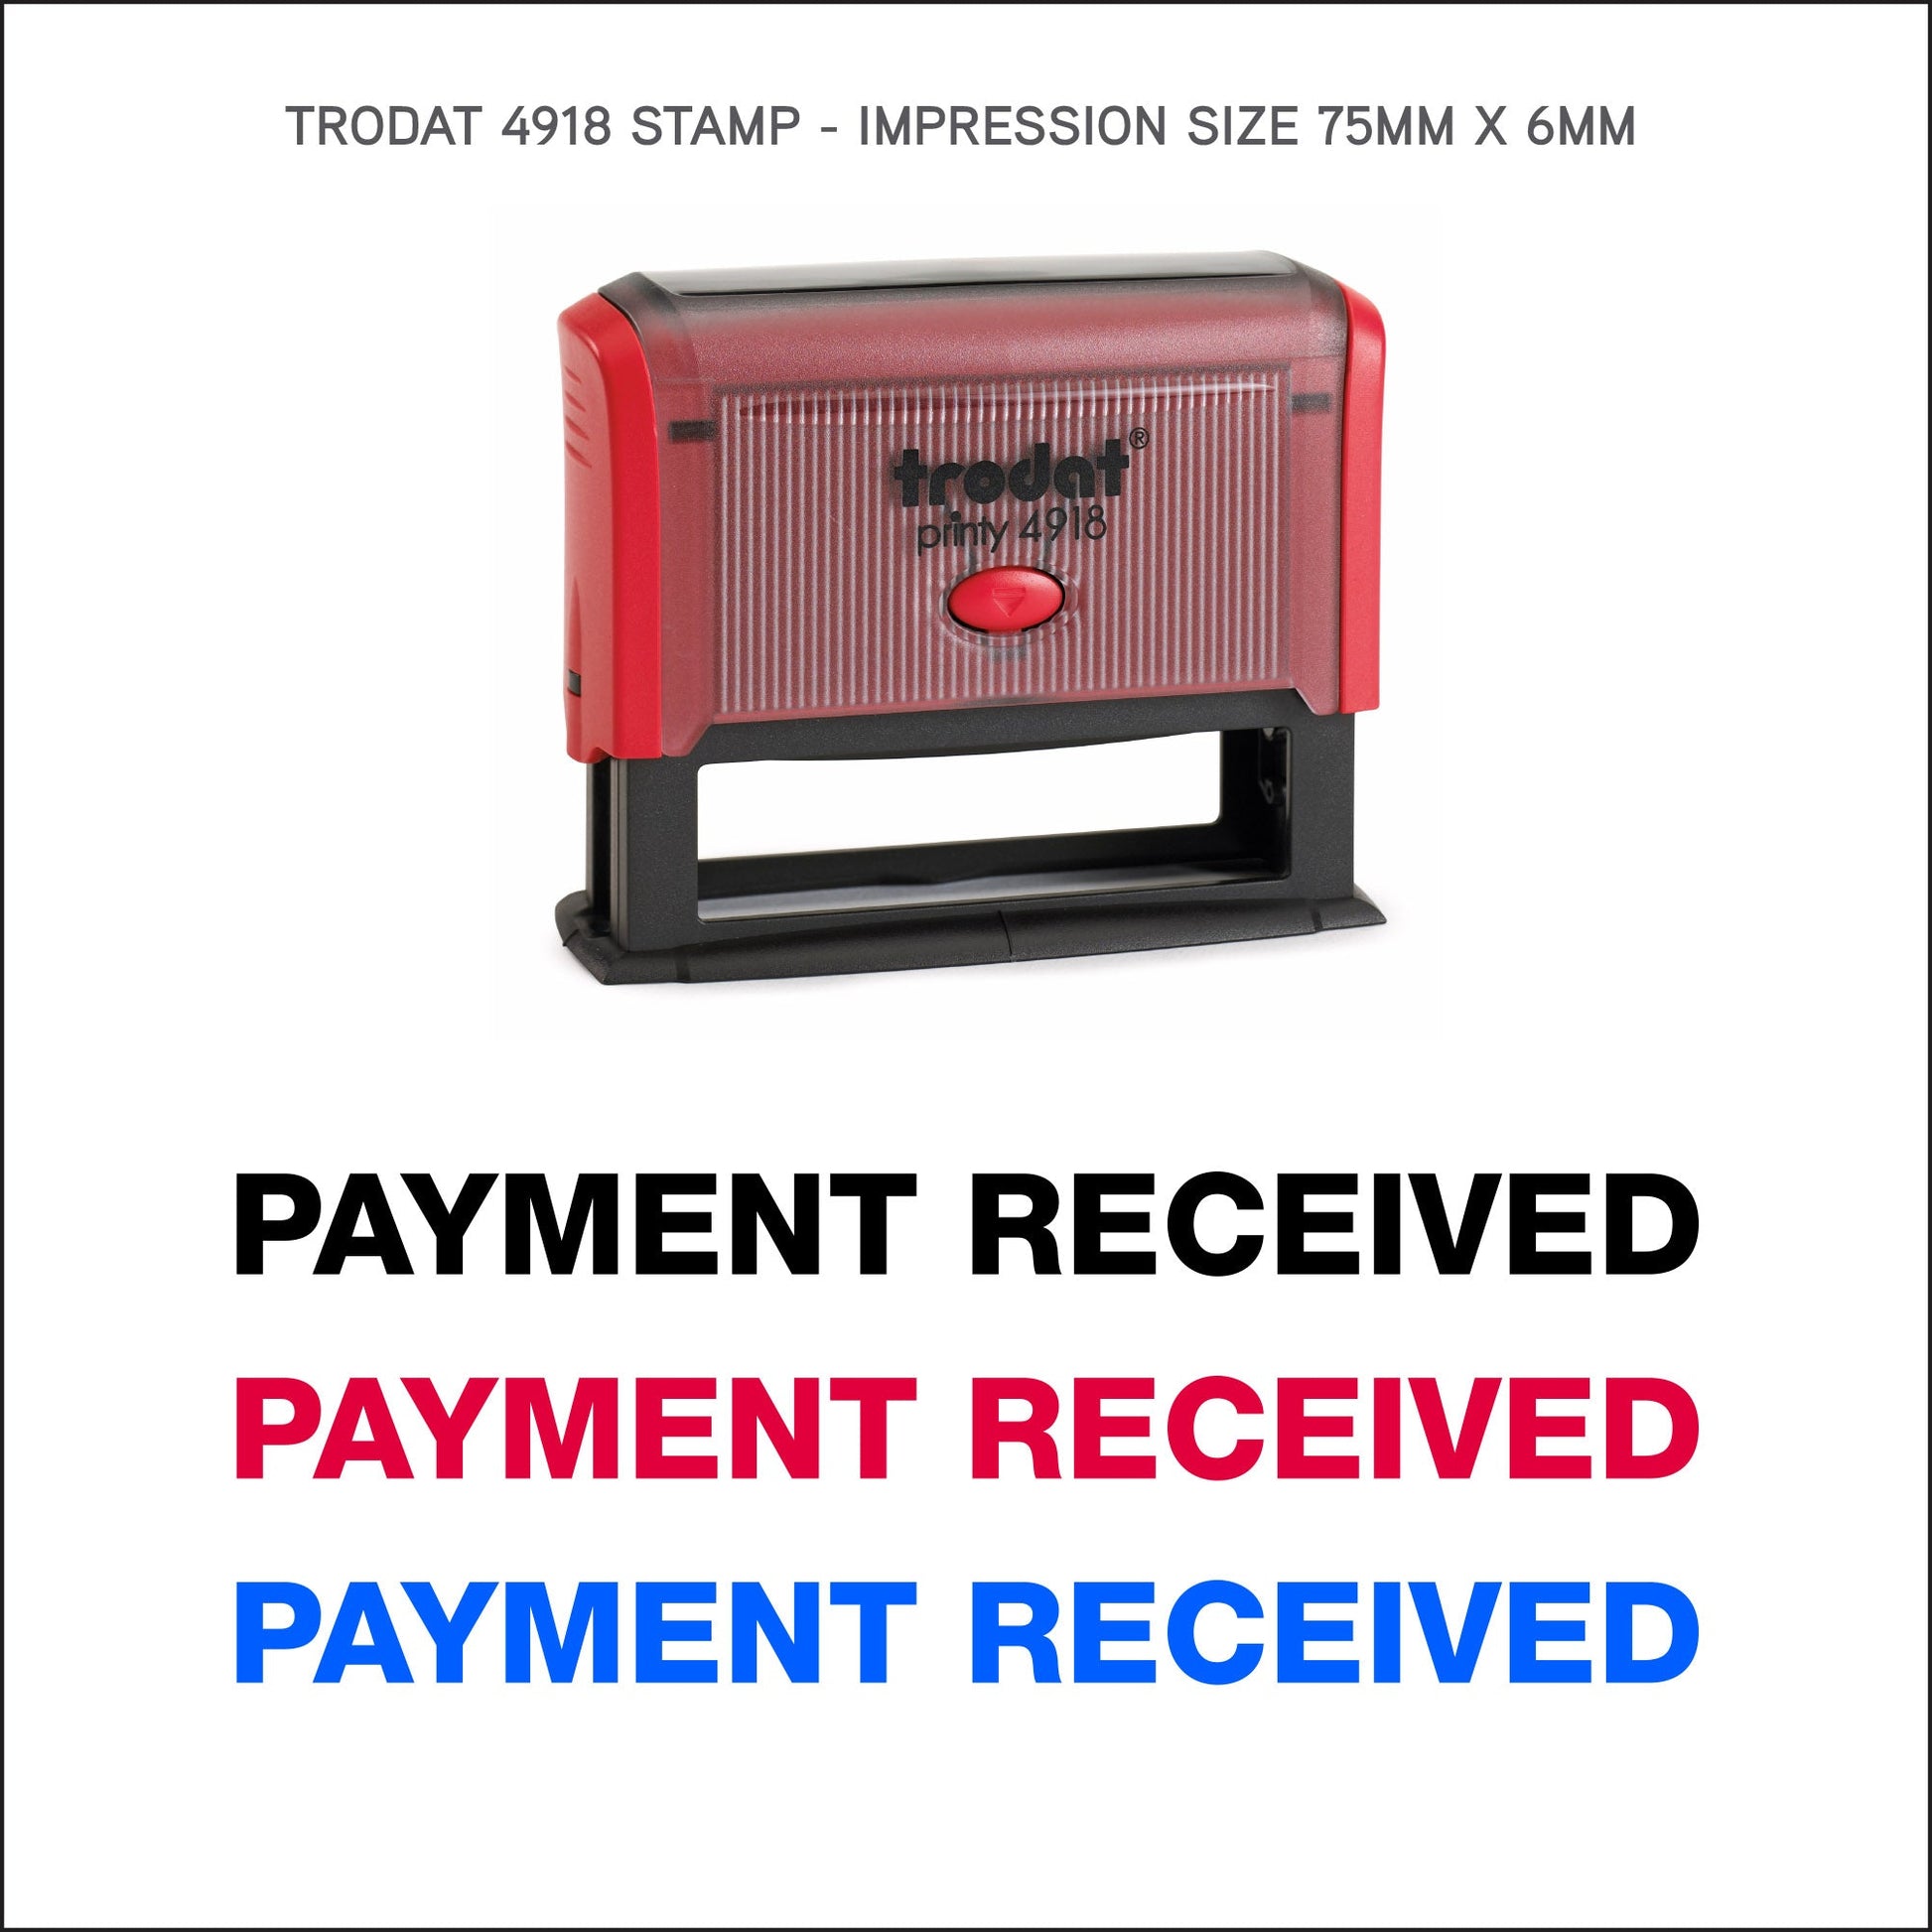 Payment Recieved - Rubber Stamp - Trodat 4918 - 75mm x 6mm Impression